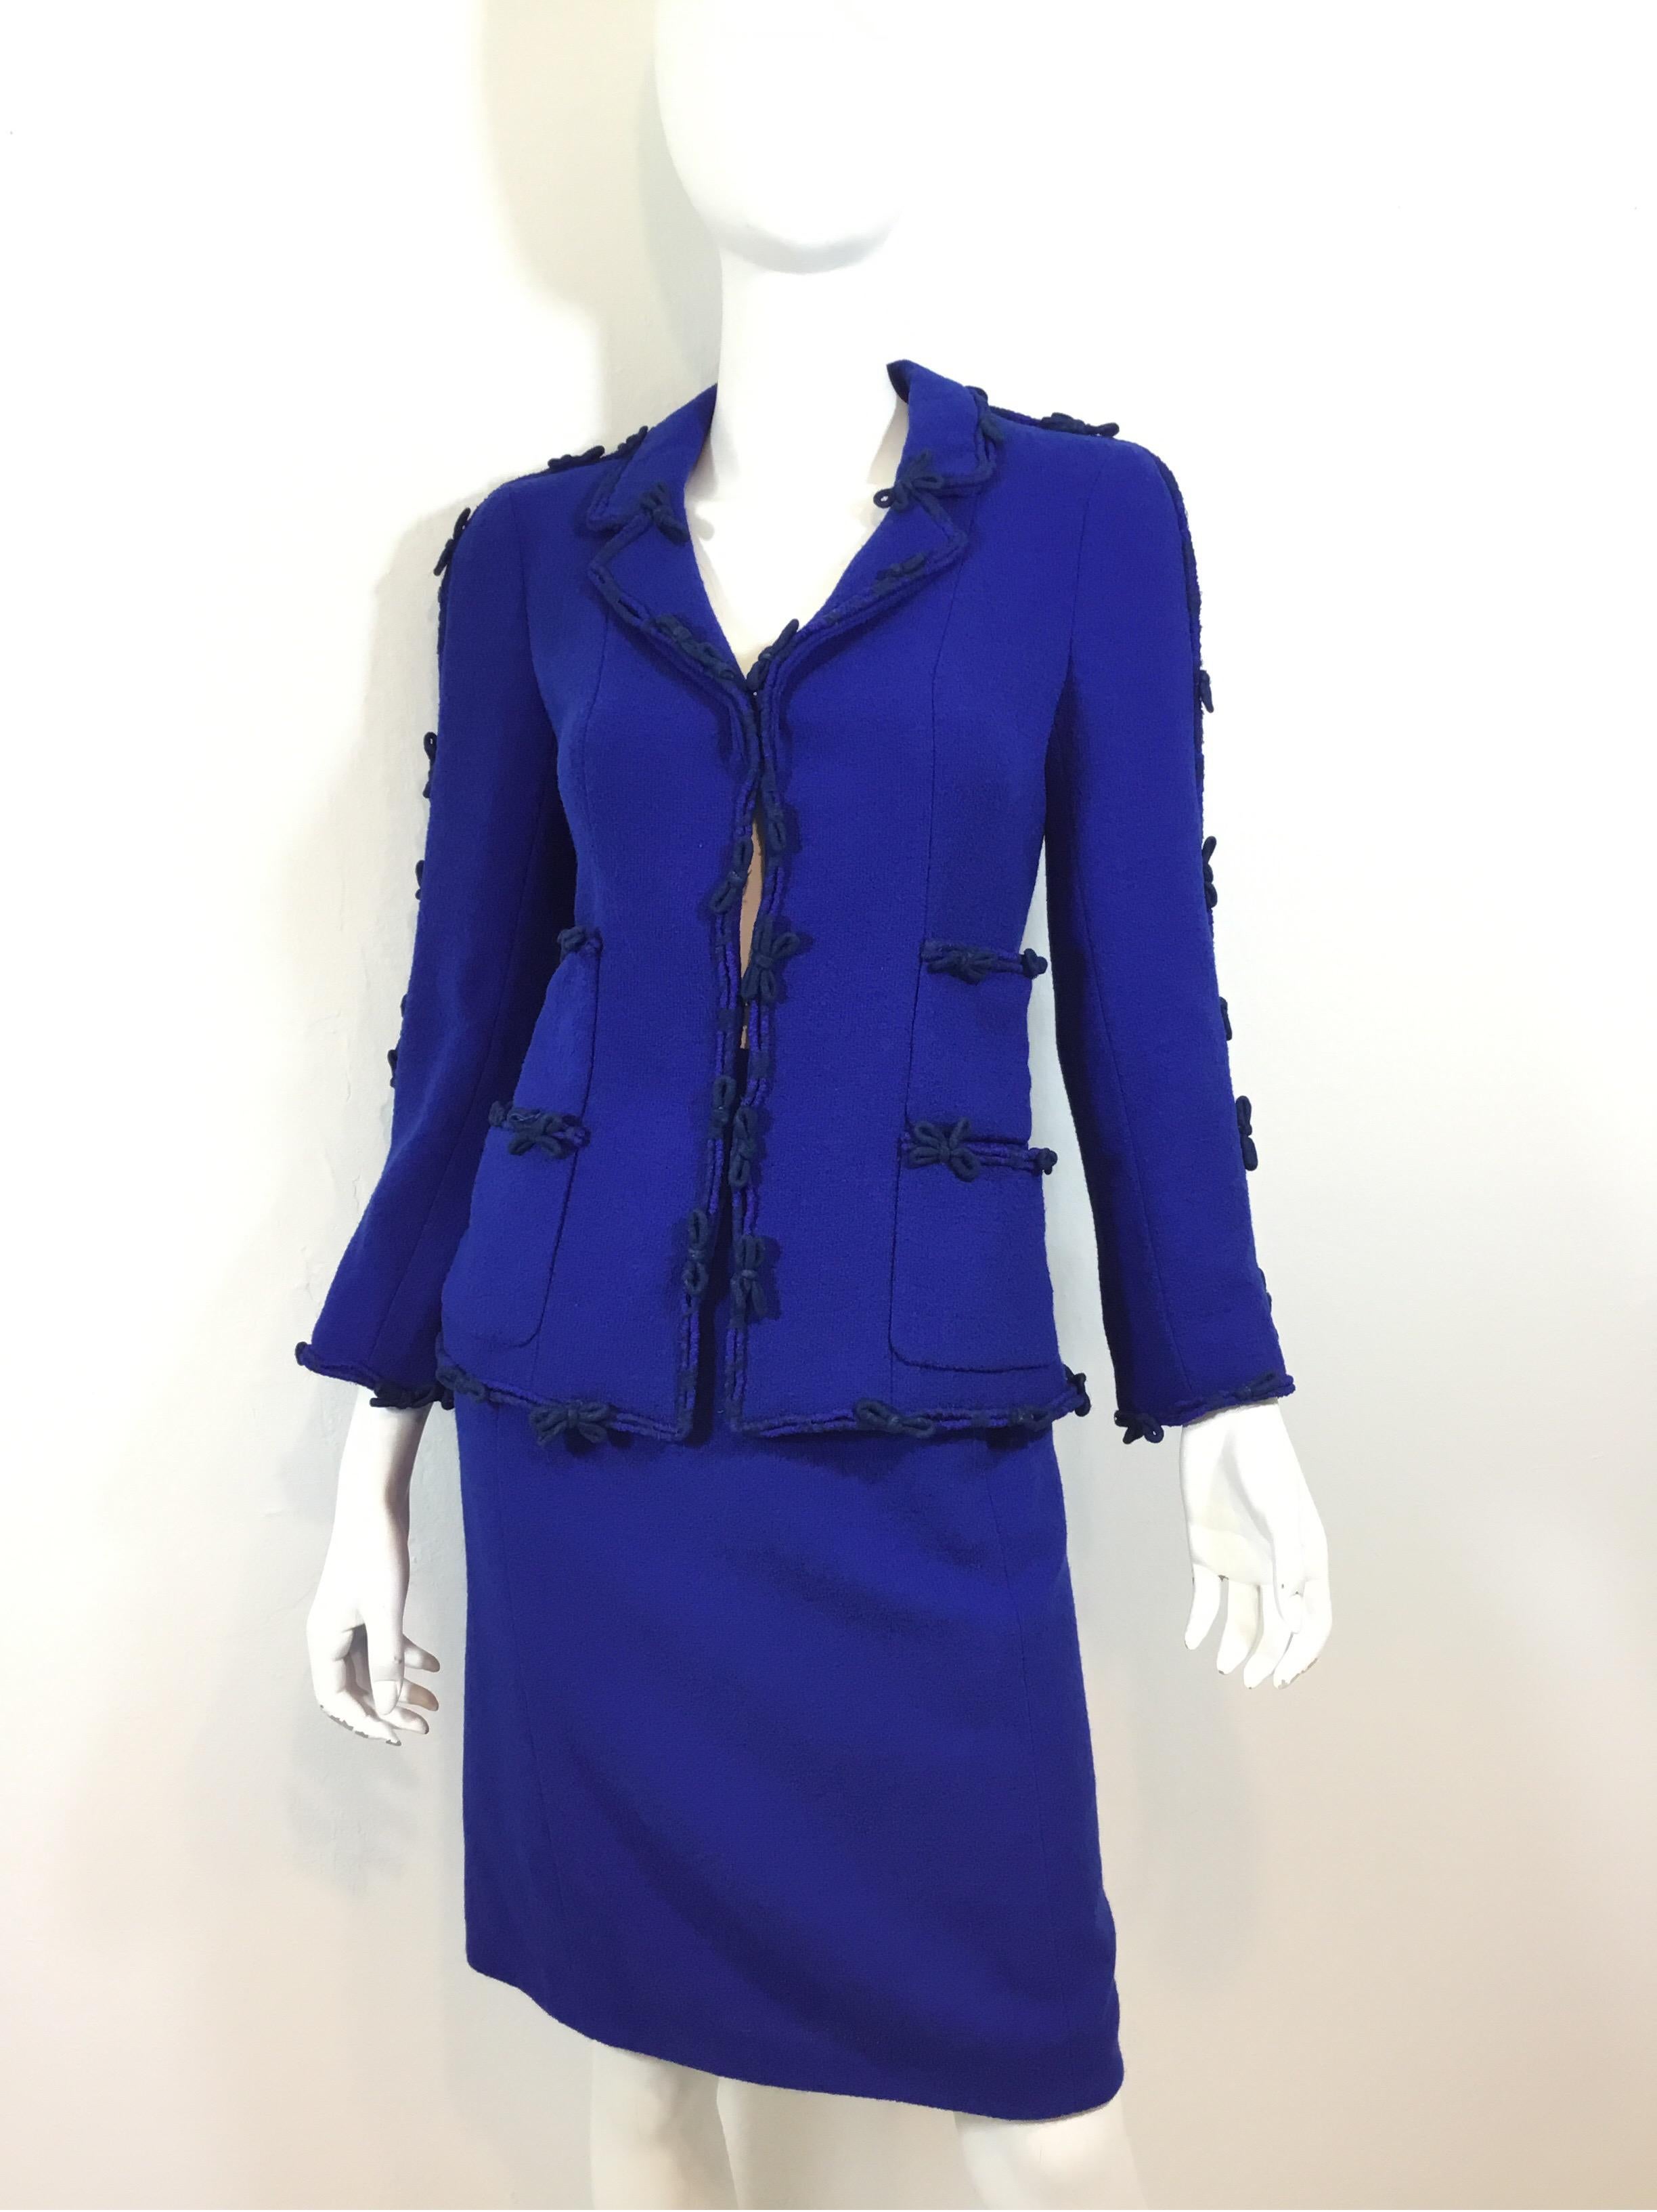 Chanel skirt suit featured in a royal blue tweed knit. Jacket has hook-and-eye fastenings, bow detail, four functional patch pockets, and a fully lining with a chain trim along the hem. Skirt has a back zipper and button closure, full lining and two